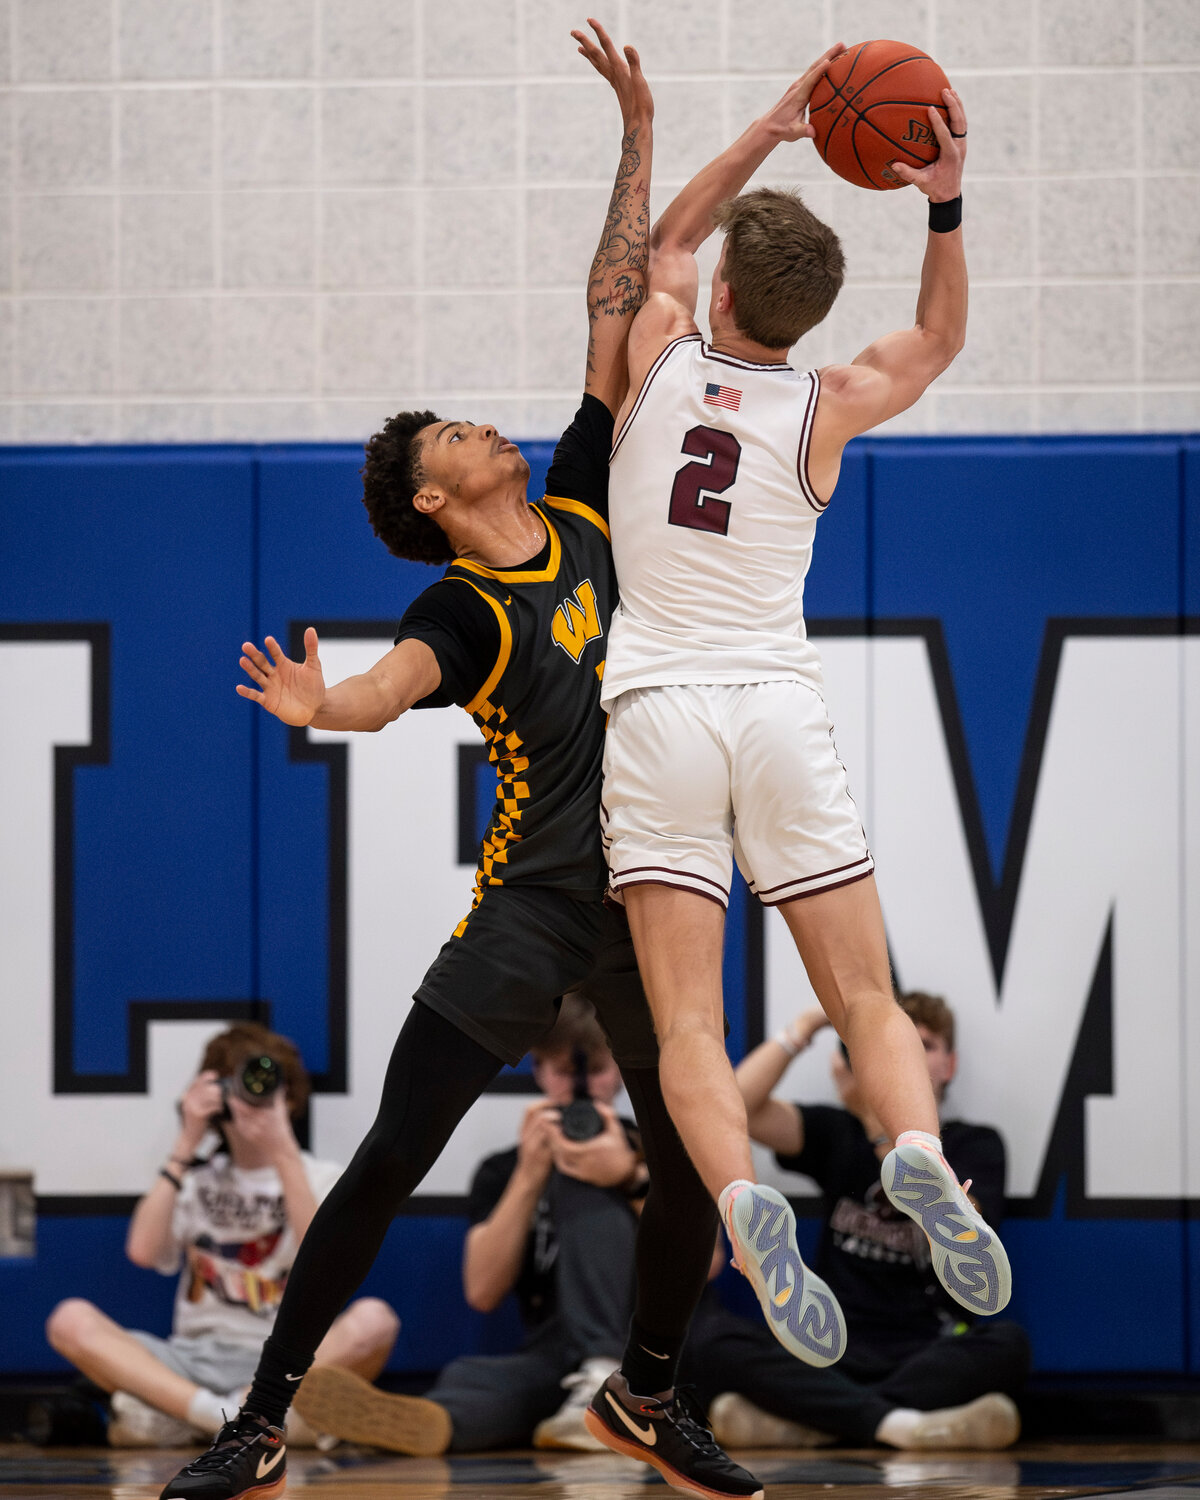 Archbishop Wood’s Jalil Bethea blocks a shot attempt from Lower Merion’s Adam Herrenkohl in the second quarter.